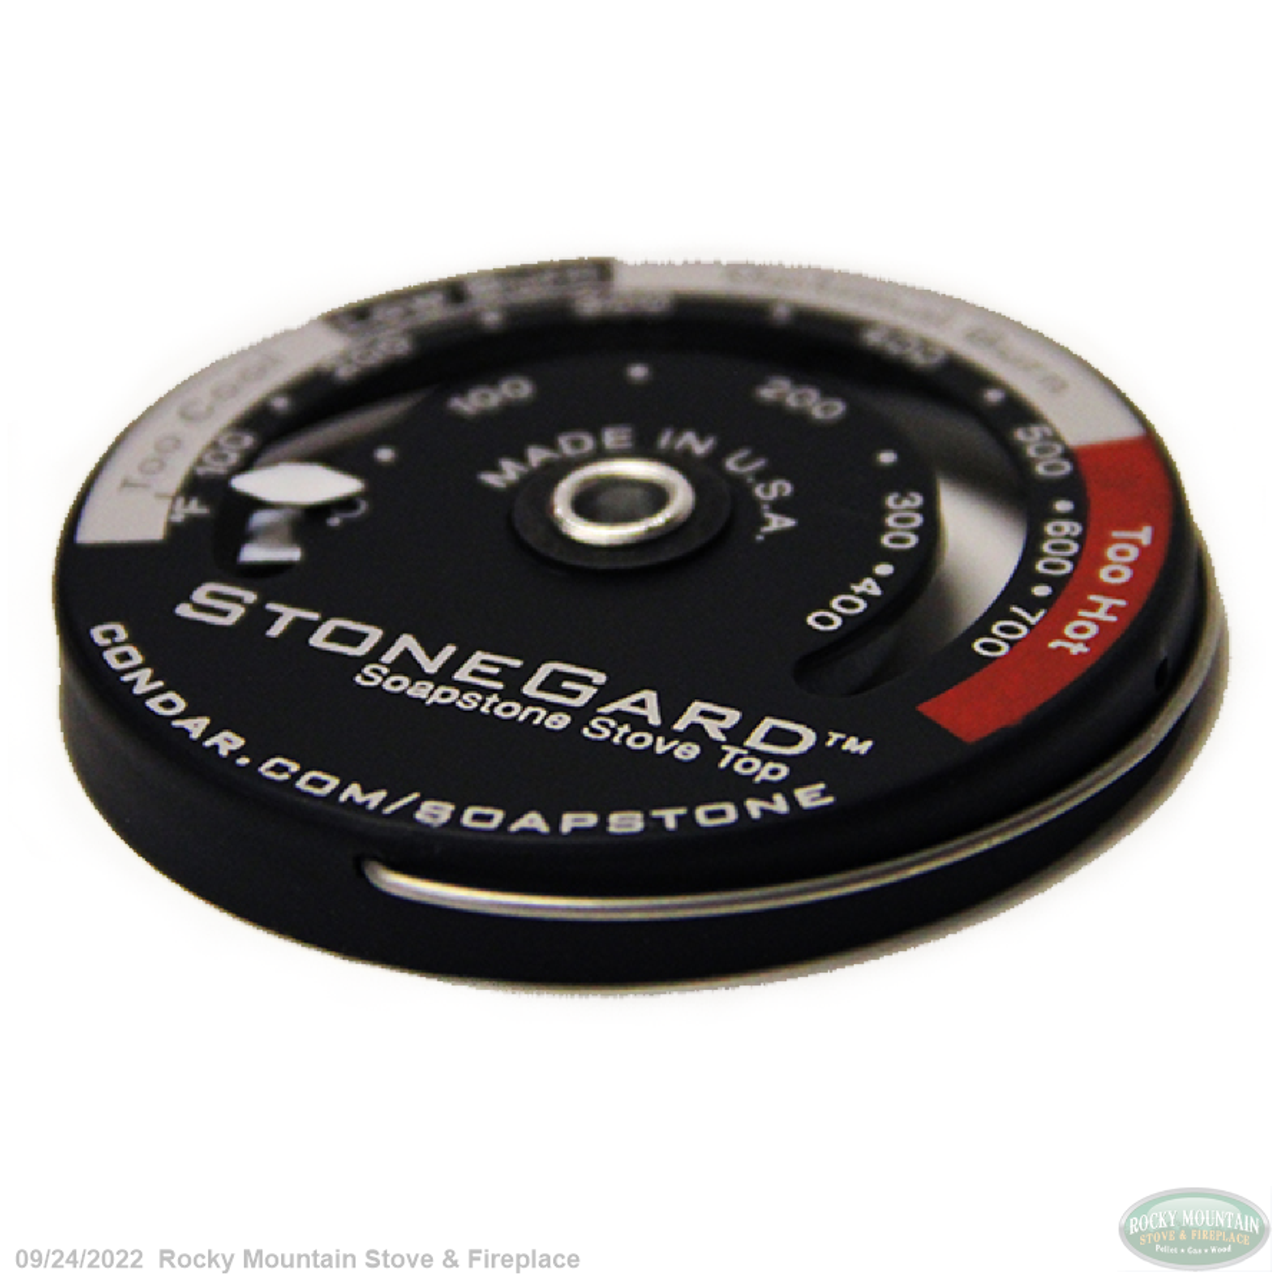 StoneGard Stove Top Thermometer for Soapstone Wood Stoves by Condar